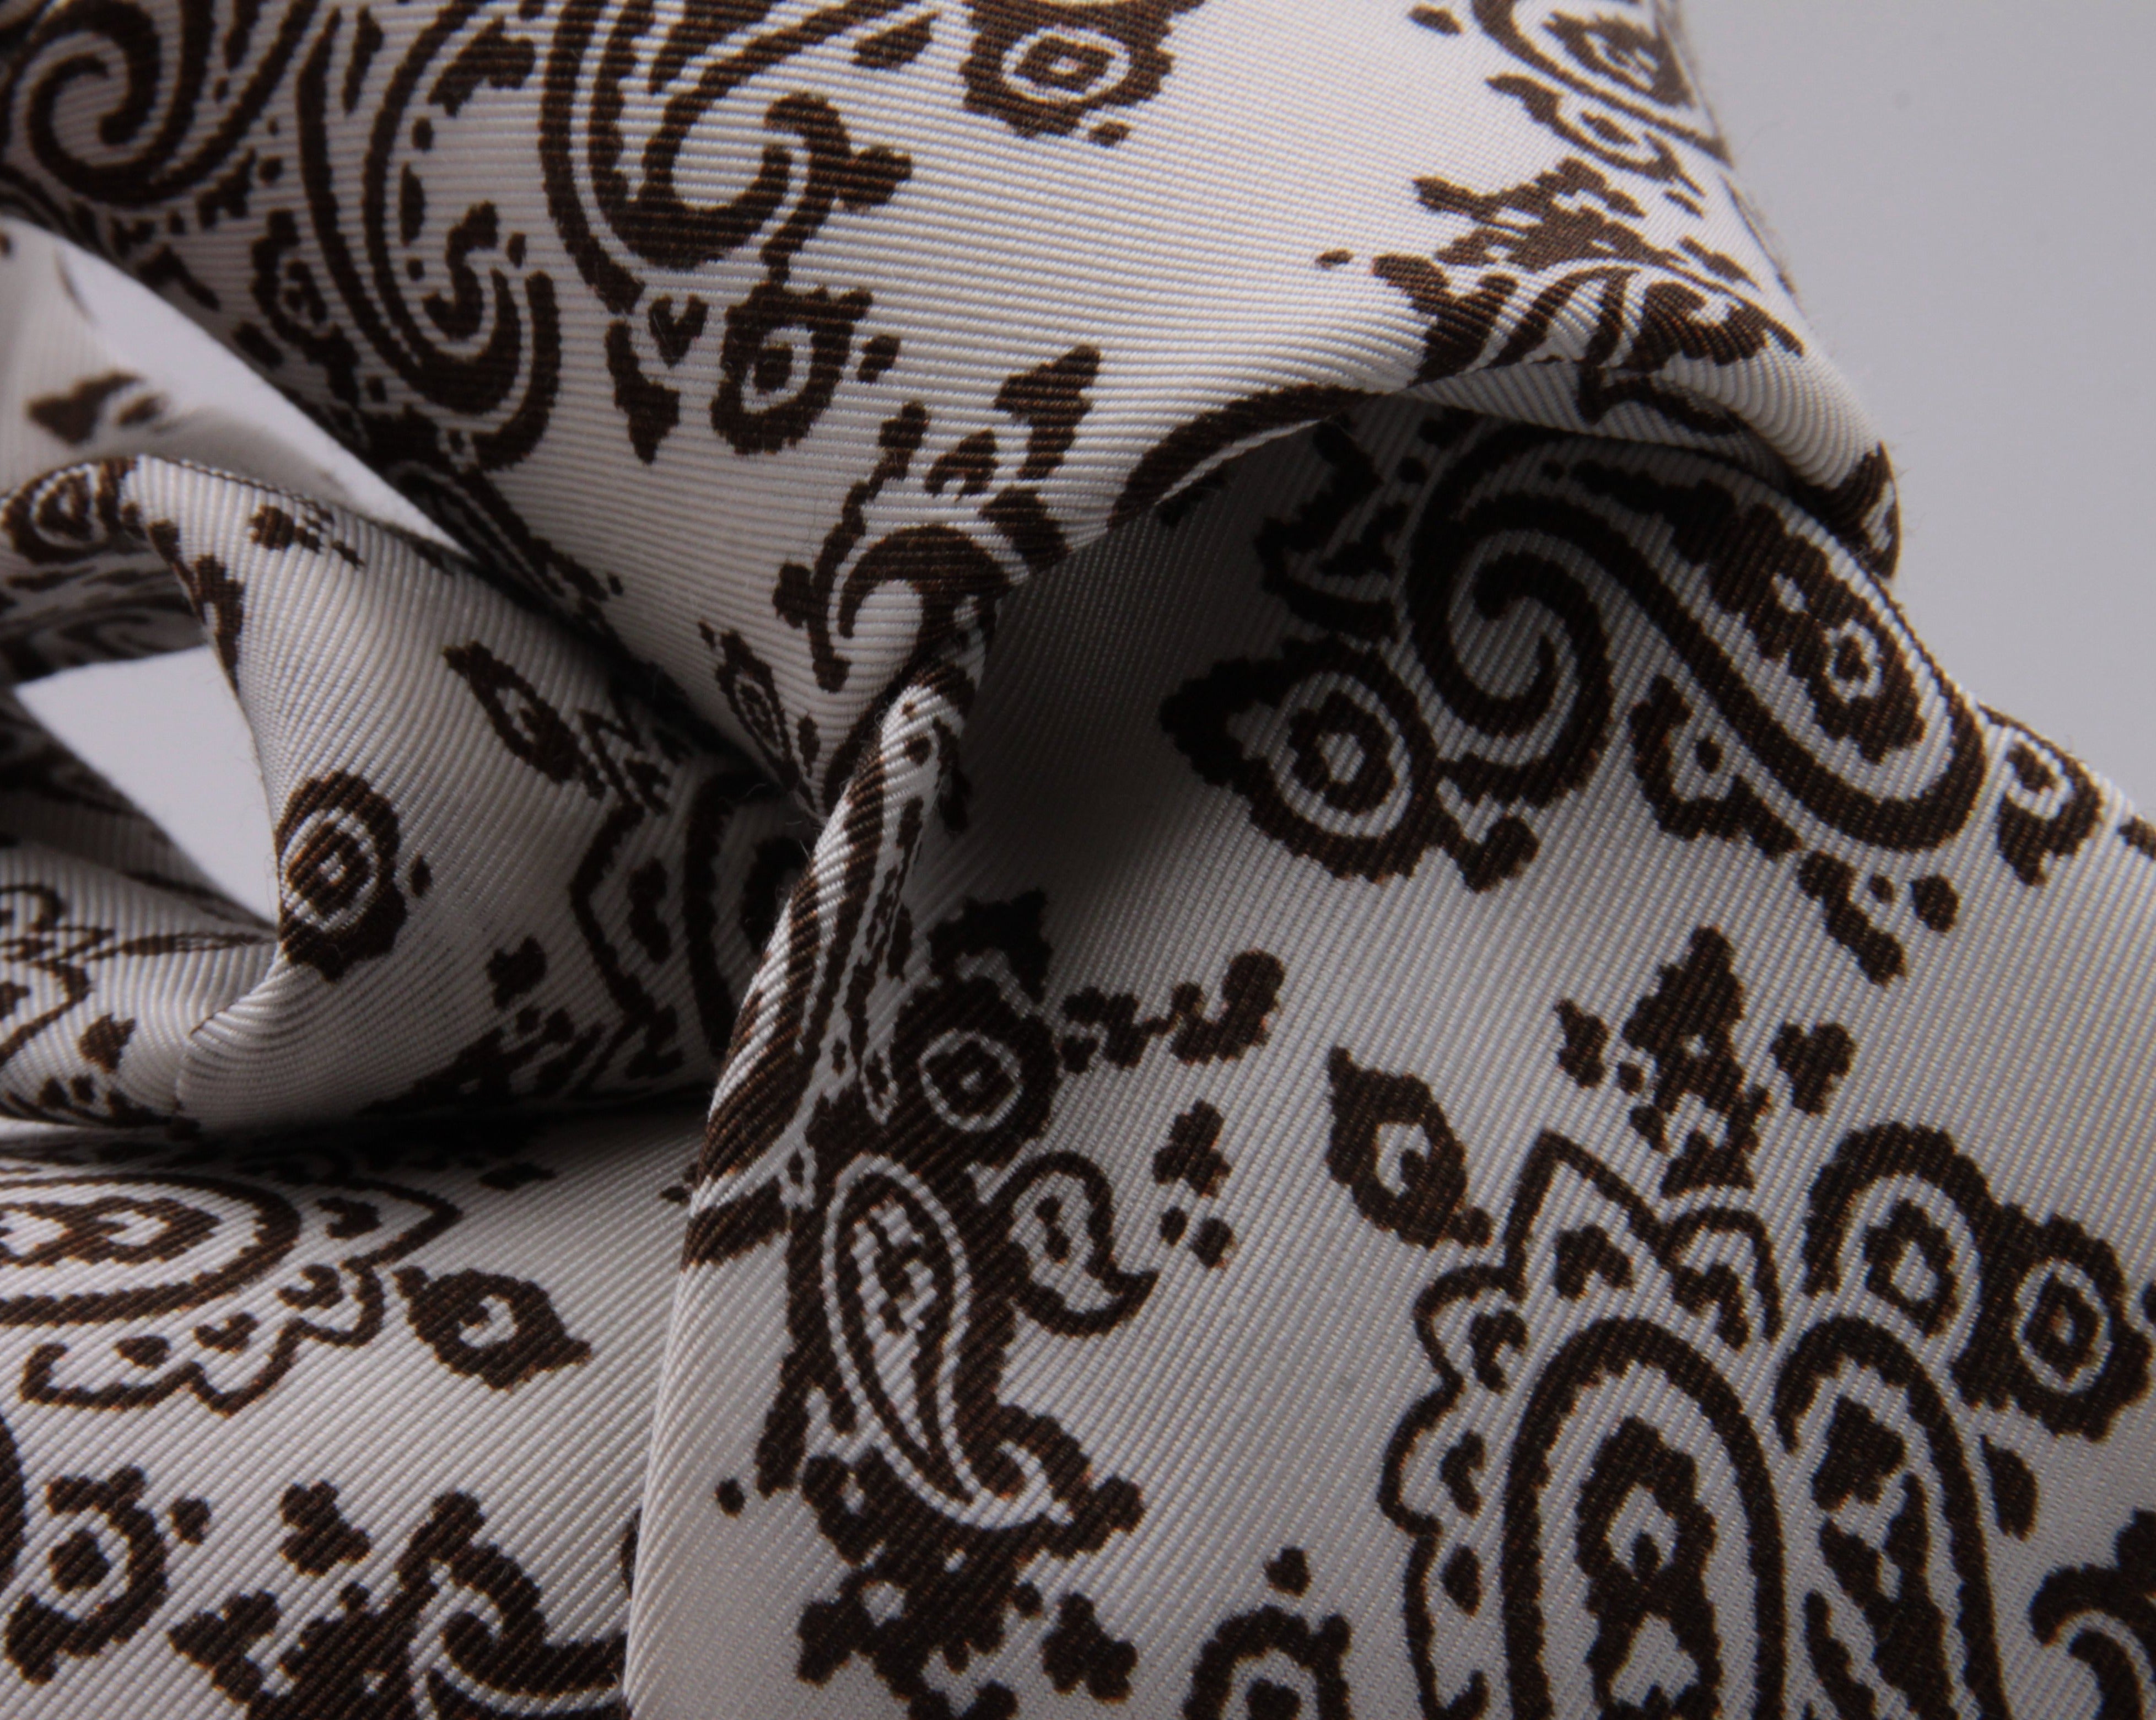 Drake's for Cruciani e Bella Printed 60% Silk 40% Cotton Self-Tipped Brown and White Paysley Motif Tie Handmade in London, England 8 cm x 149 cm #5411